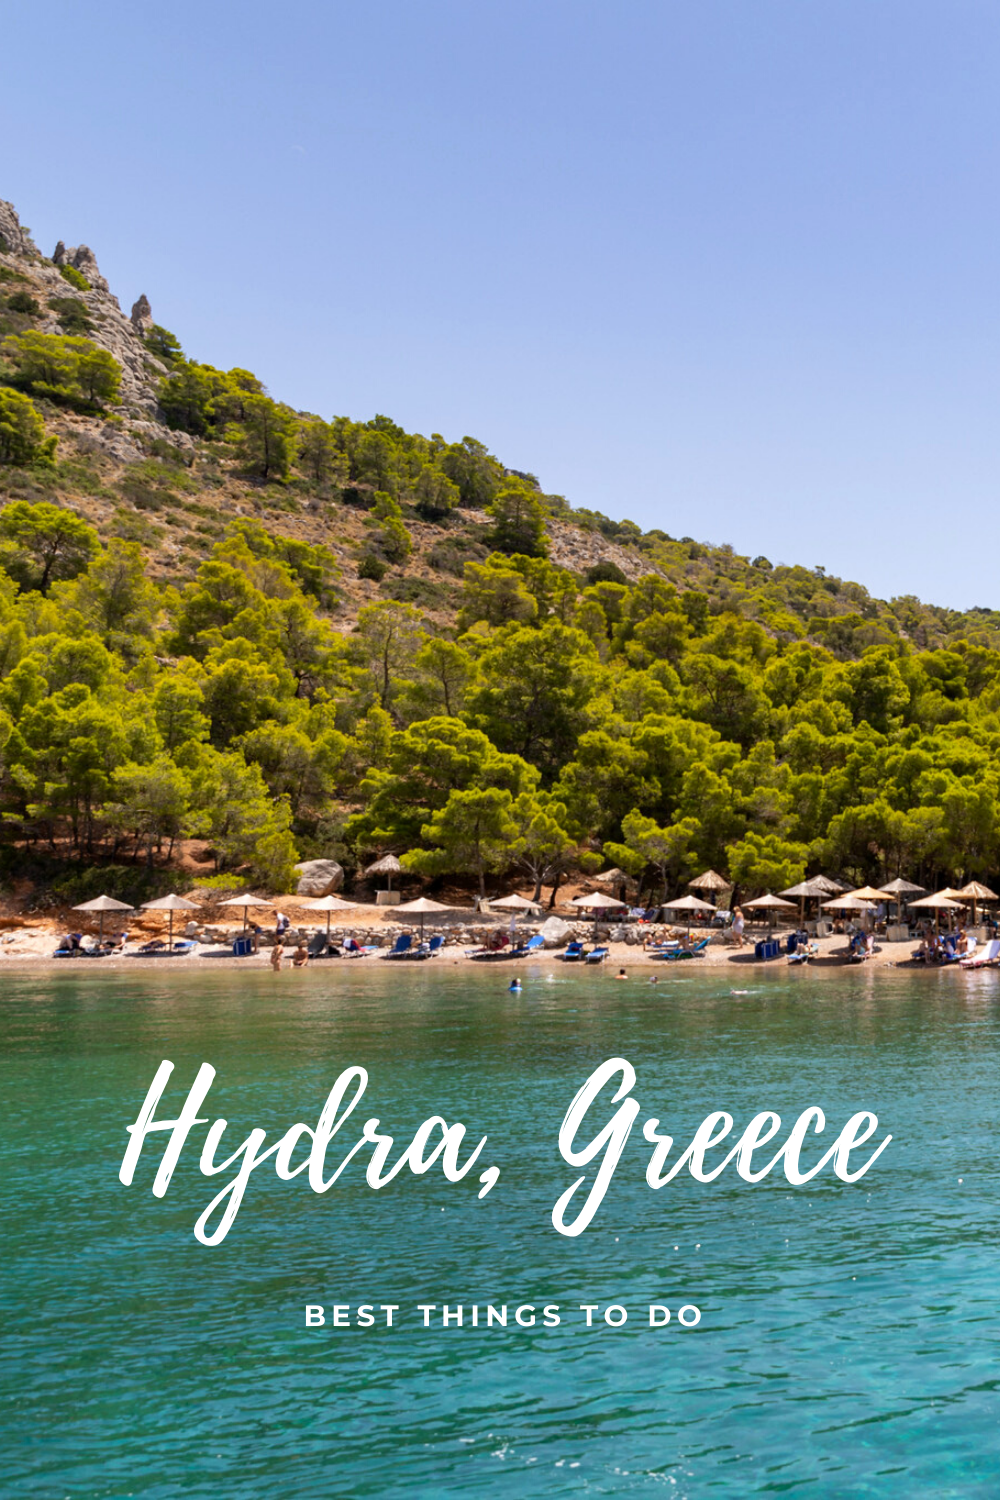 10 Best Things to do in Hydra, Greece